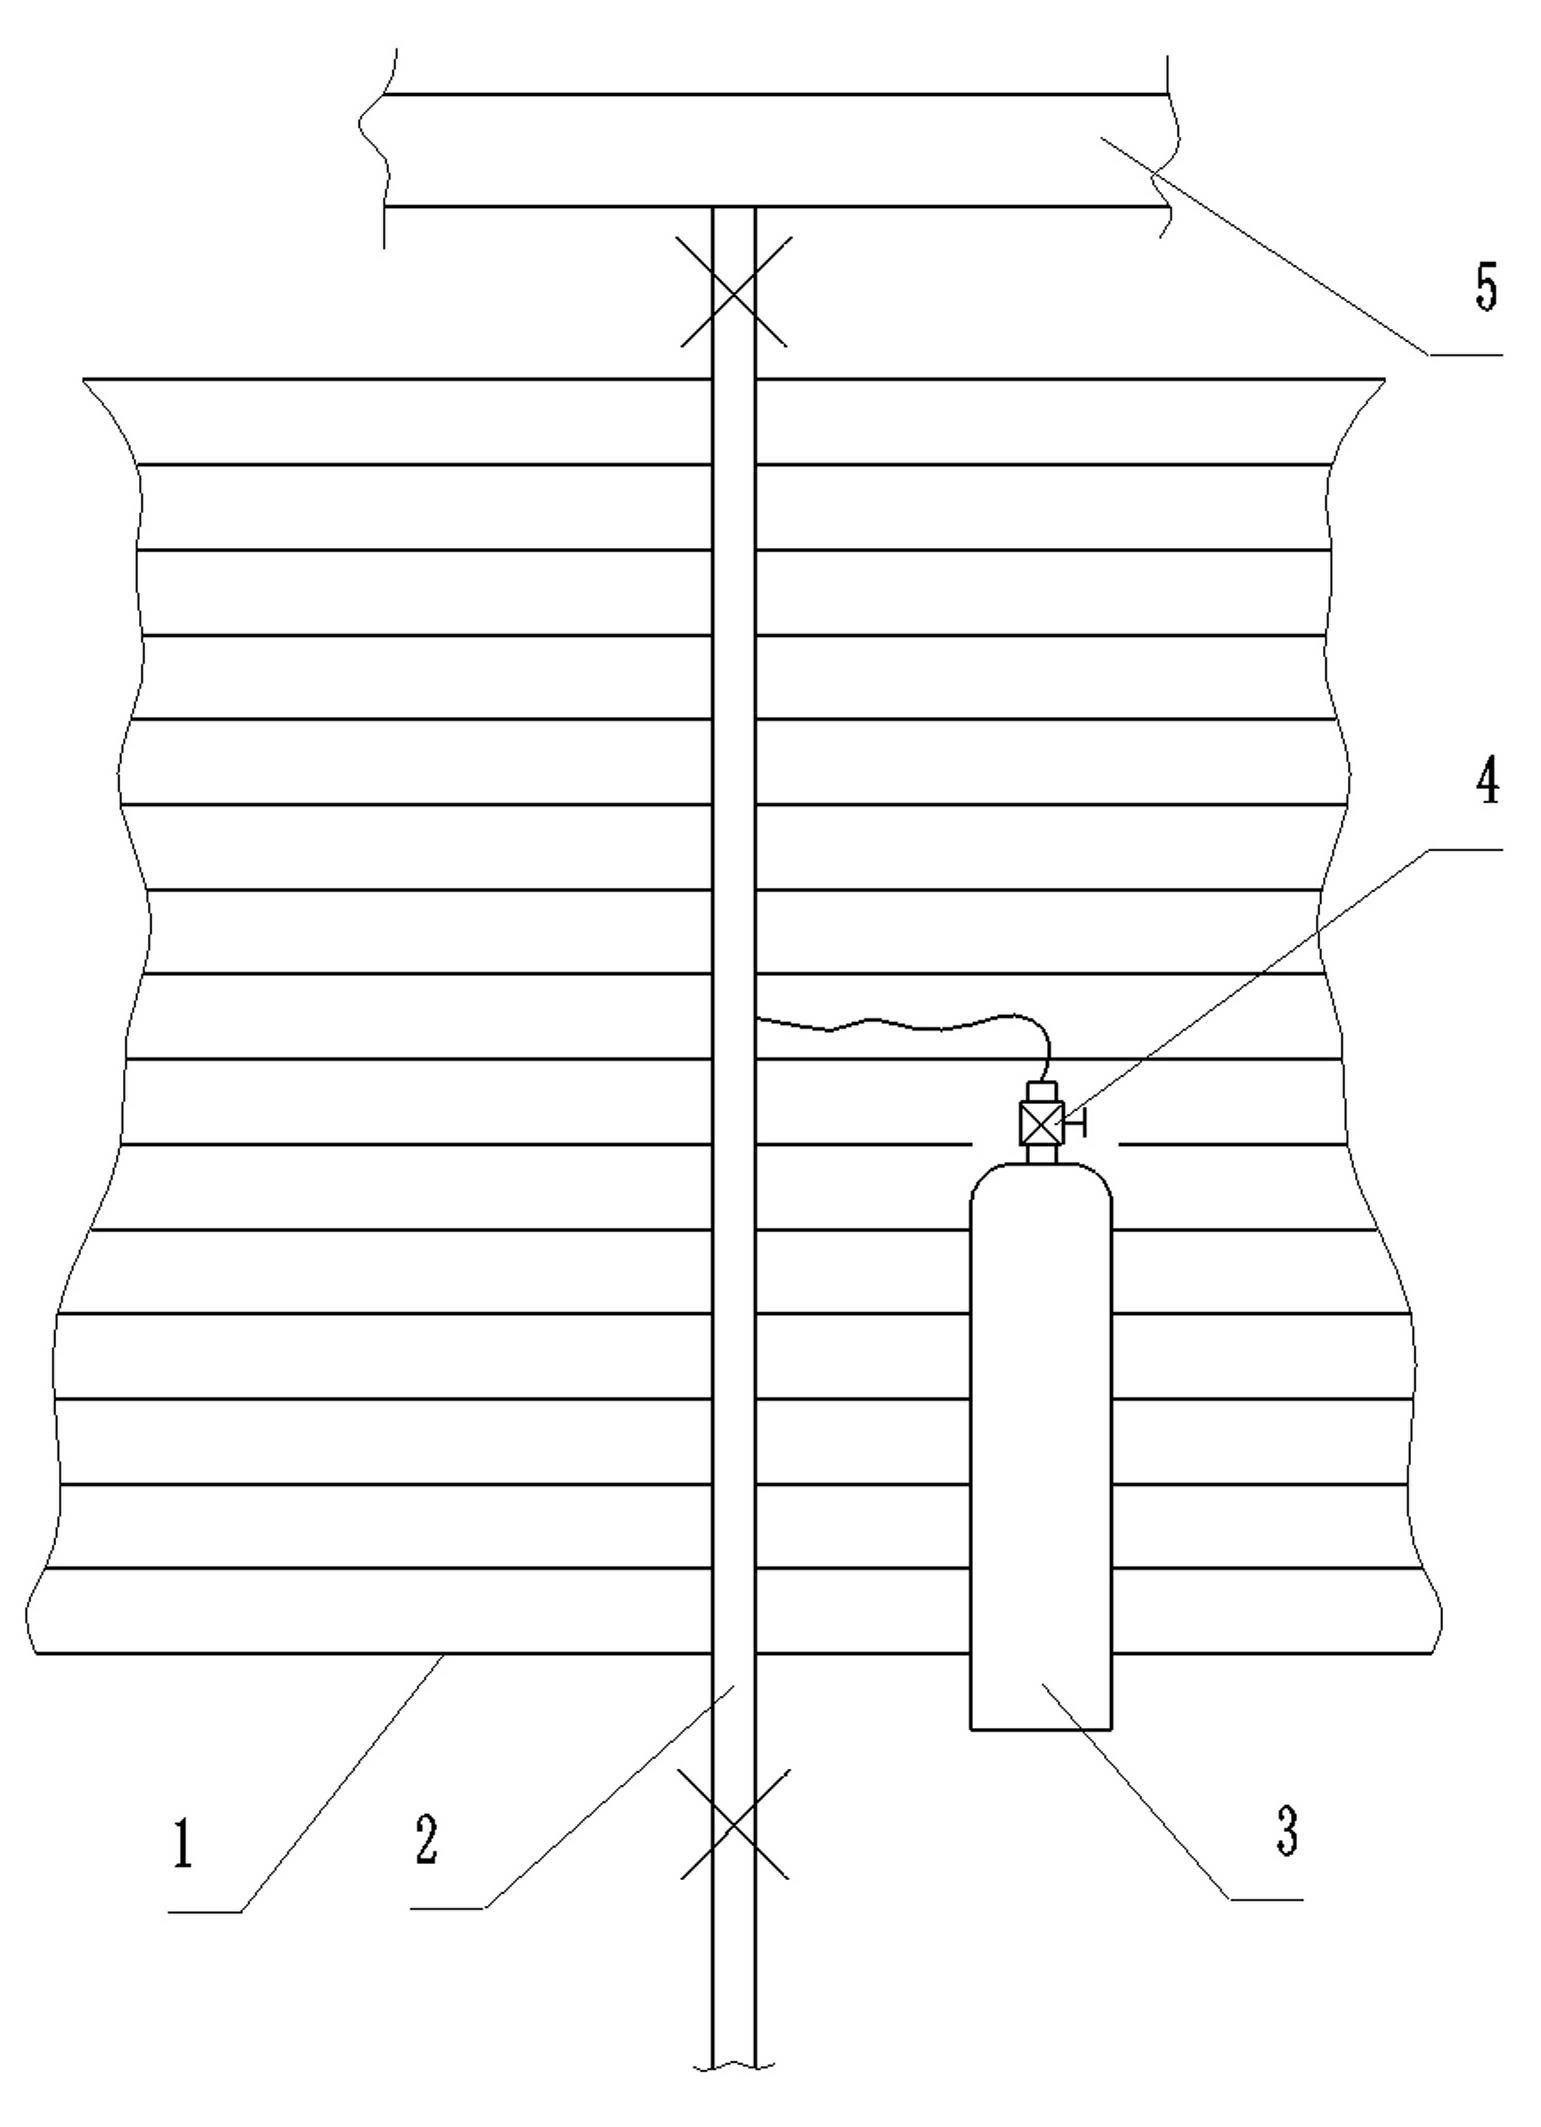 Method for applying carbon dioxide by use of farmland micro-irrigation system